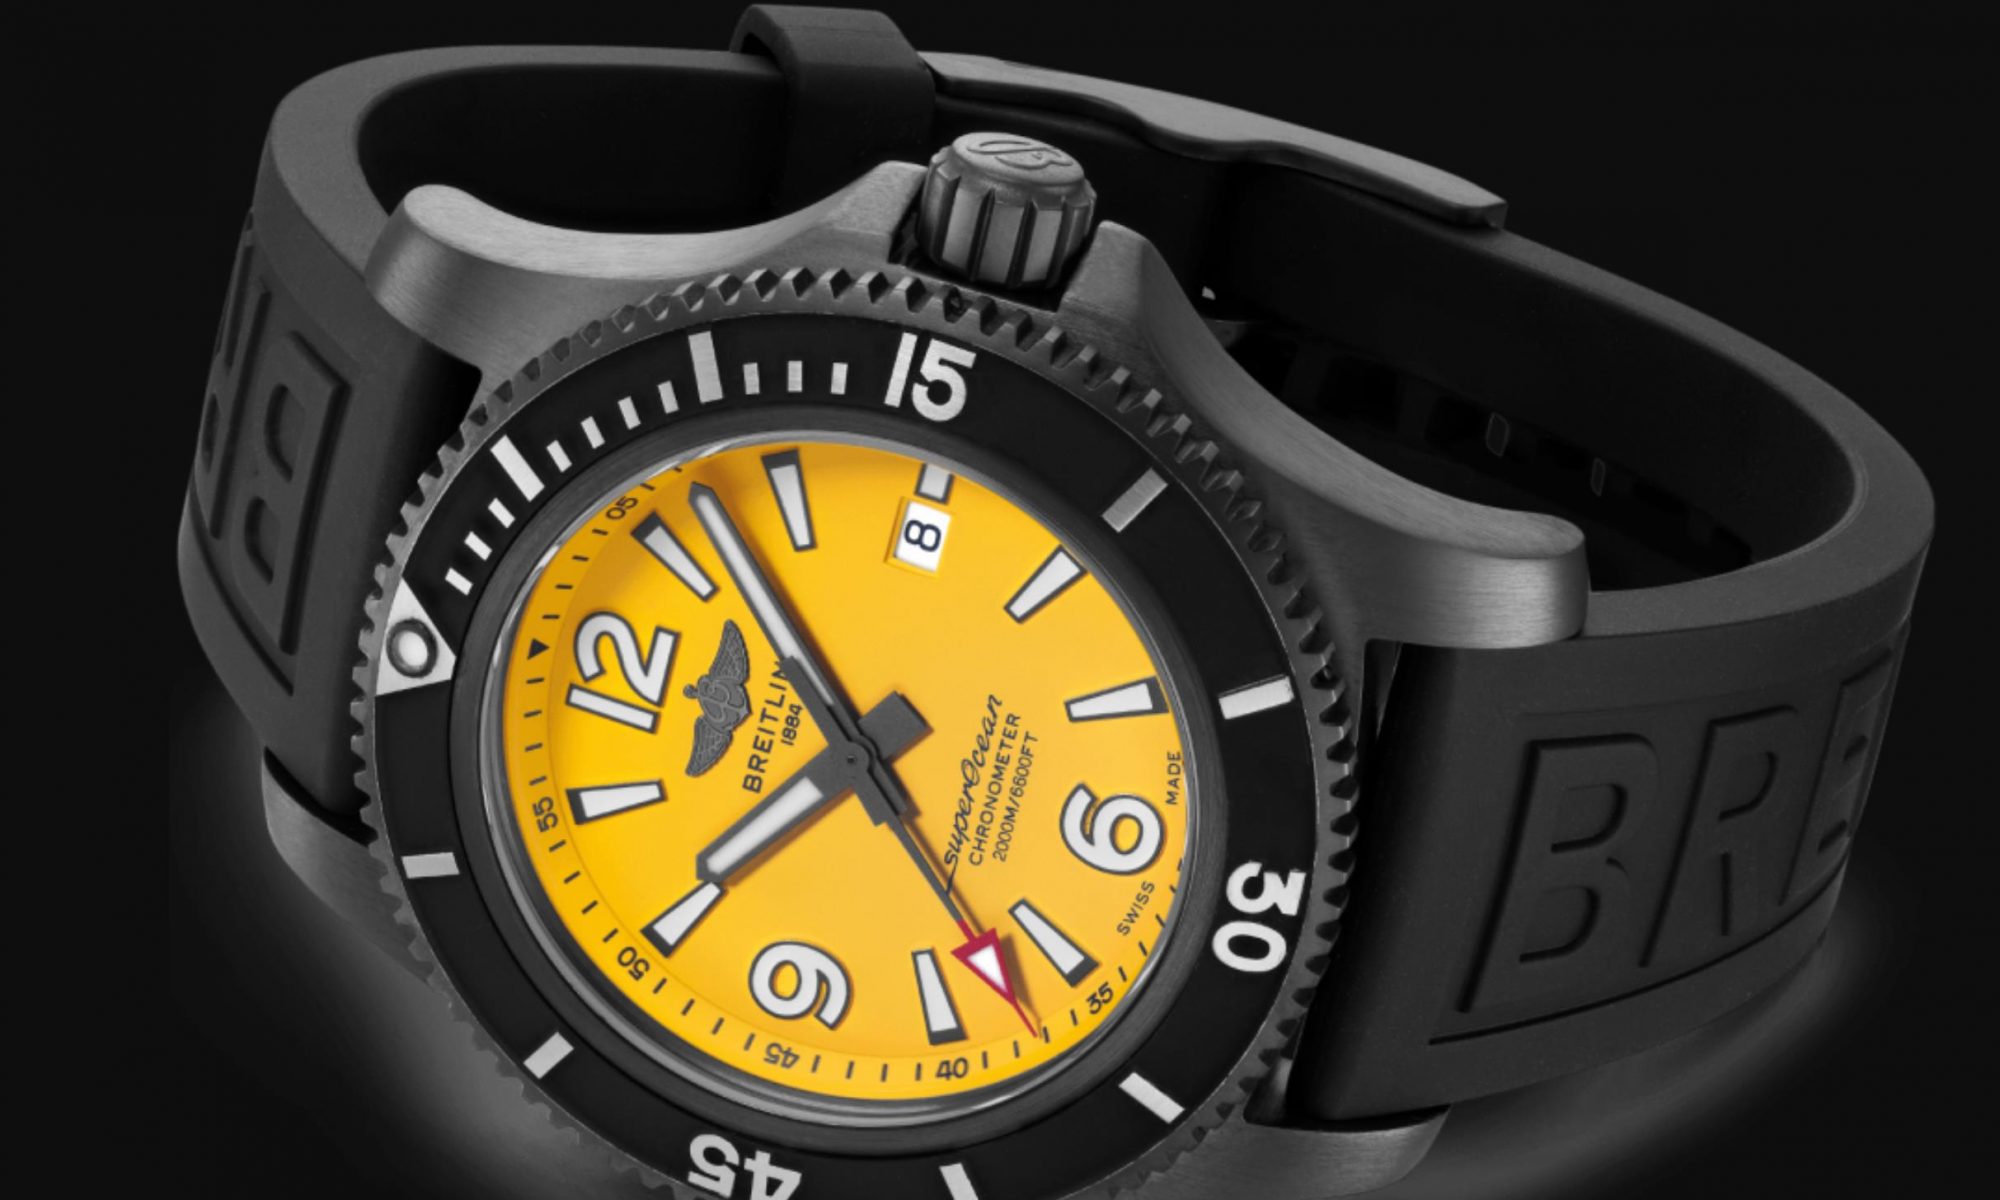 the yellow dial fake watch has a black strap.